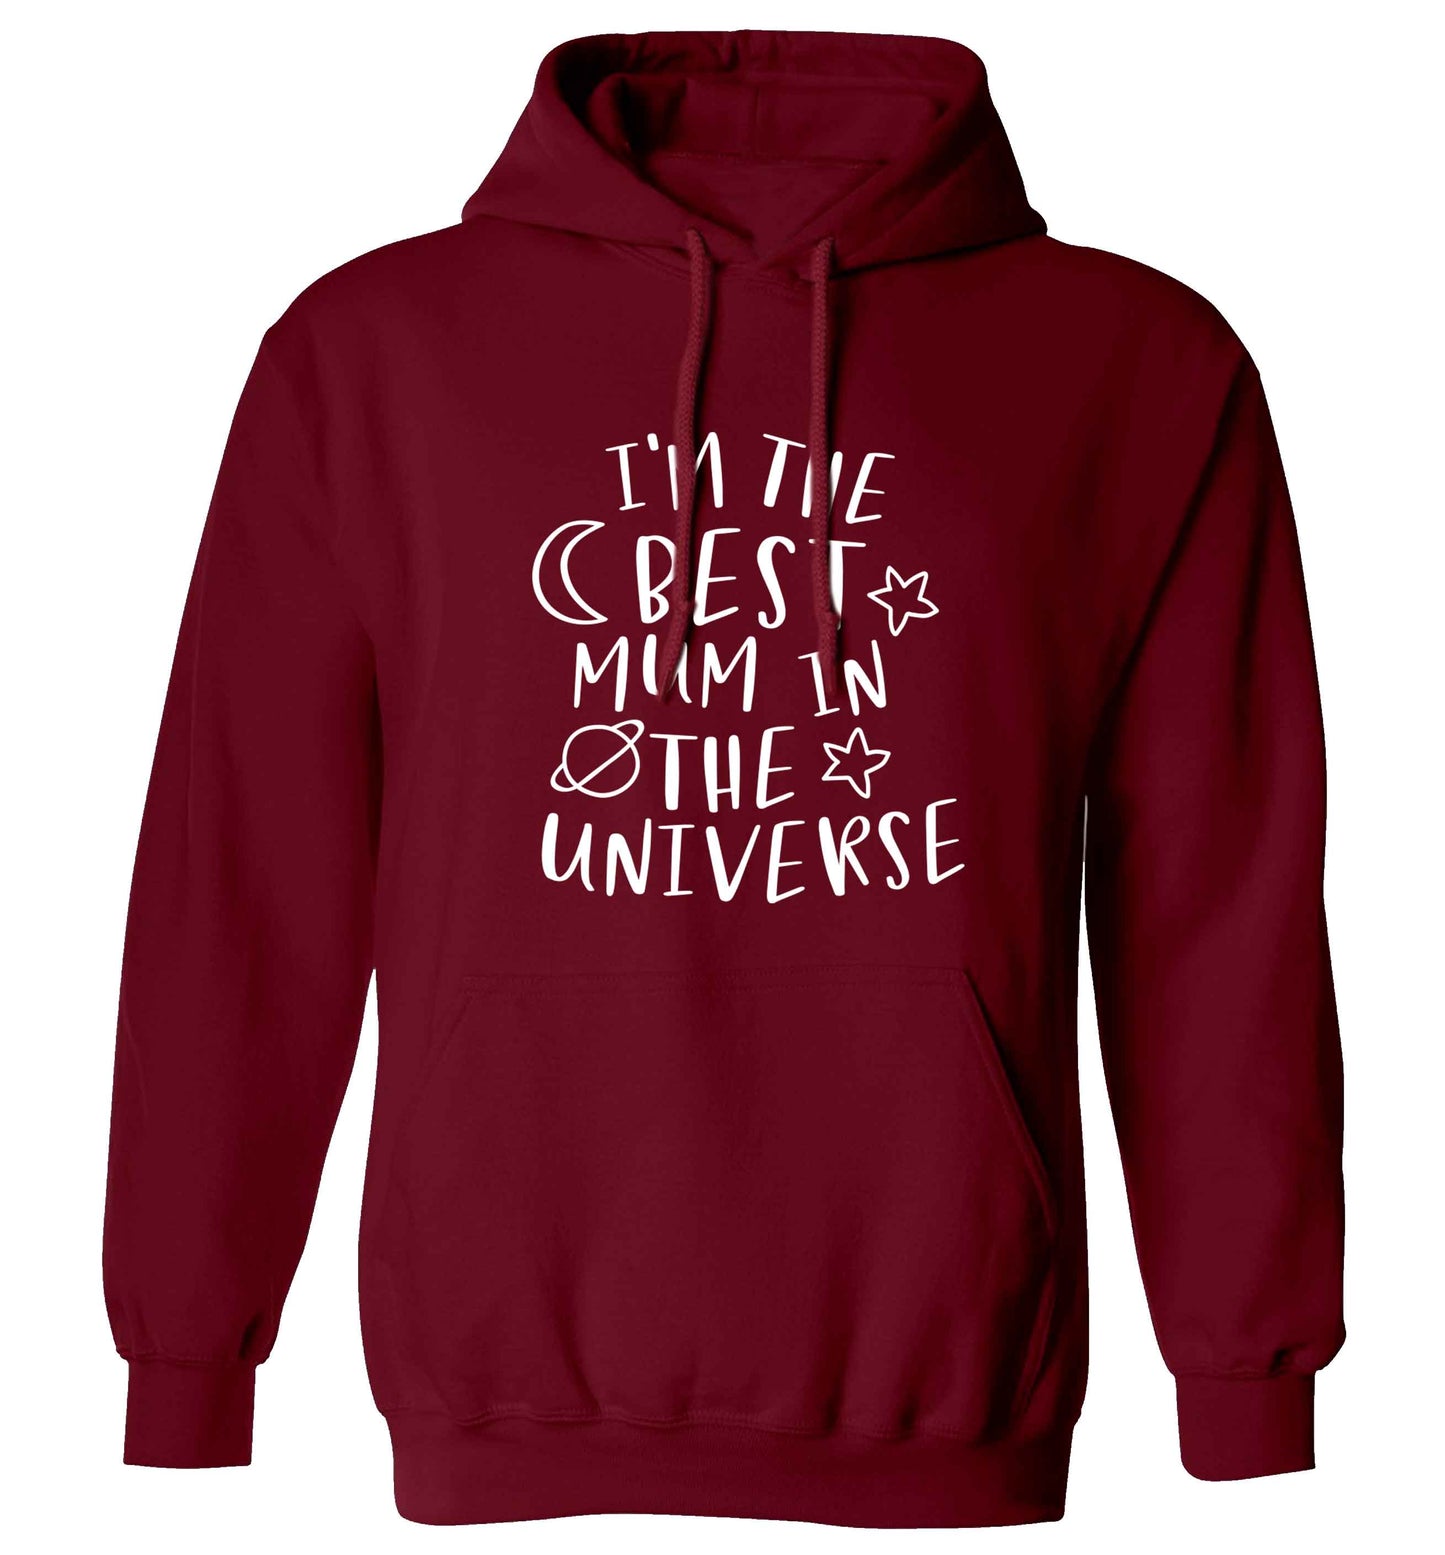 I'm the best mum in the universe adults unisex maroon hoodie 2XL